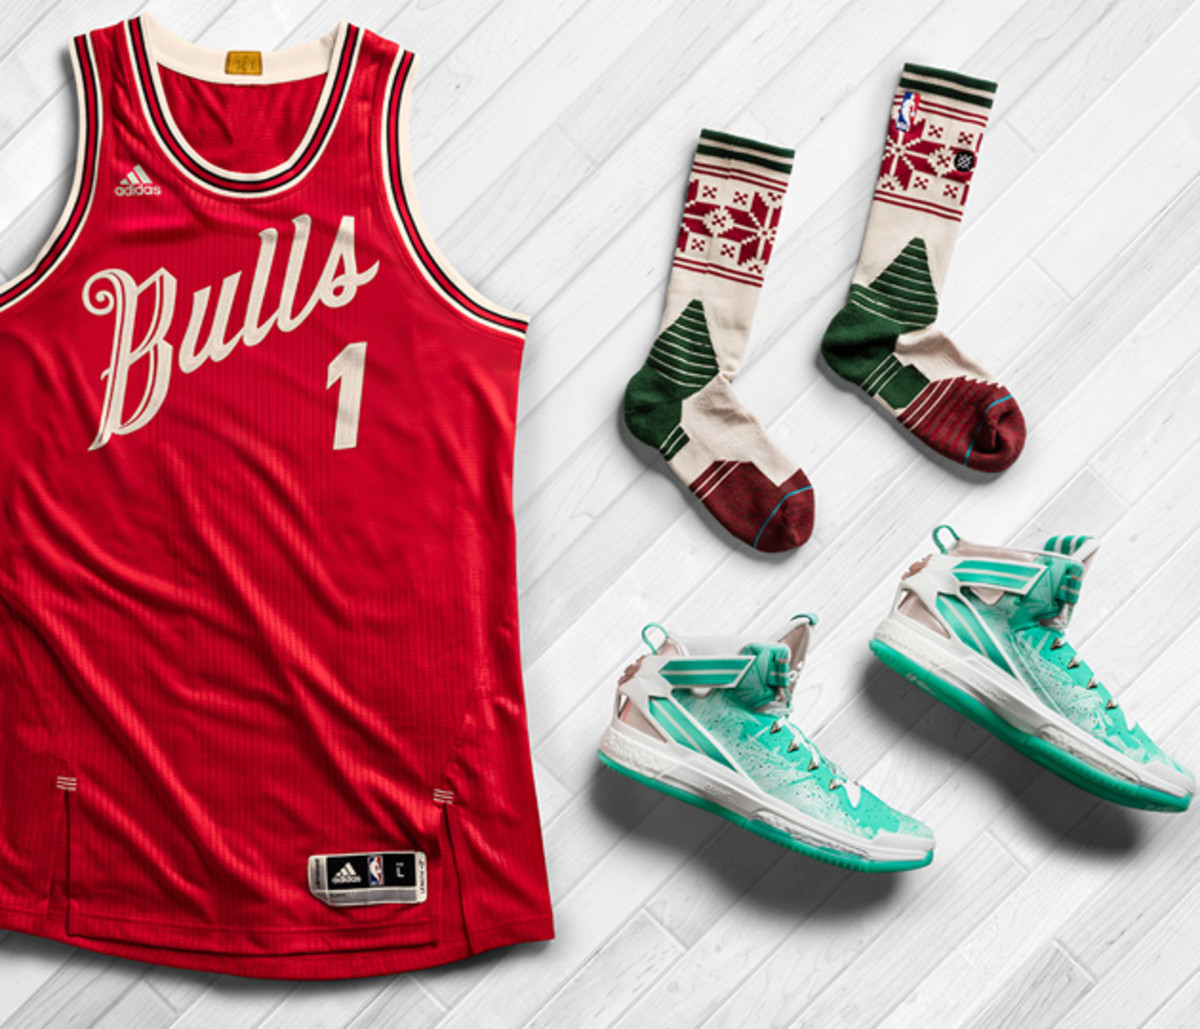 clippers christmas jersey